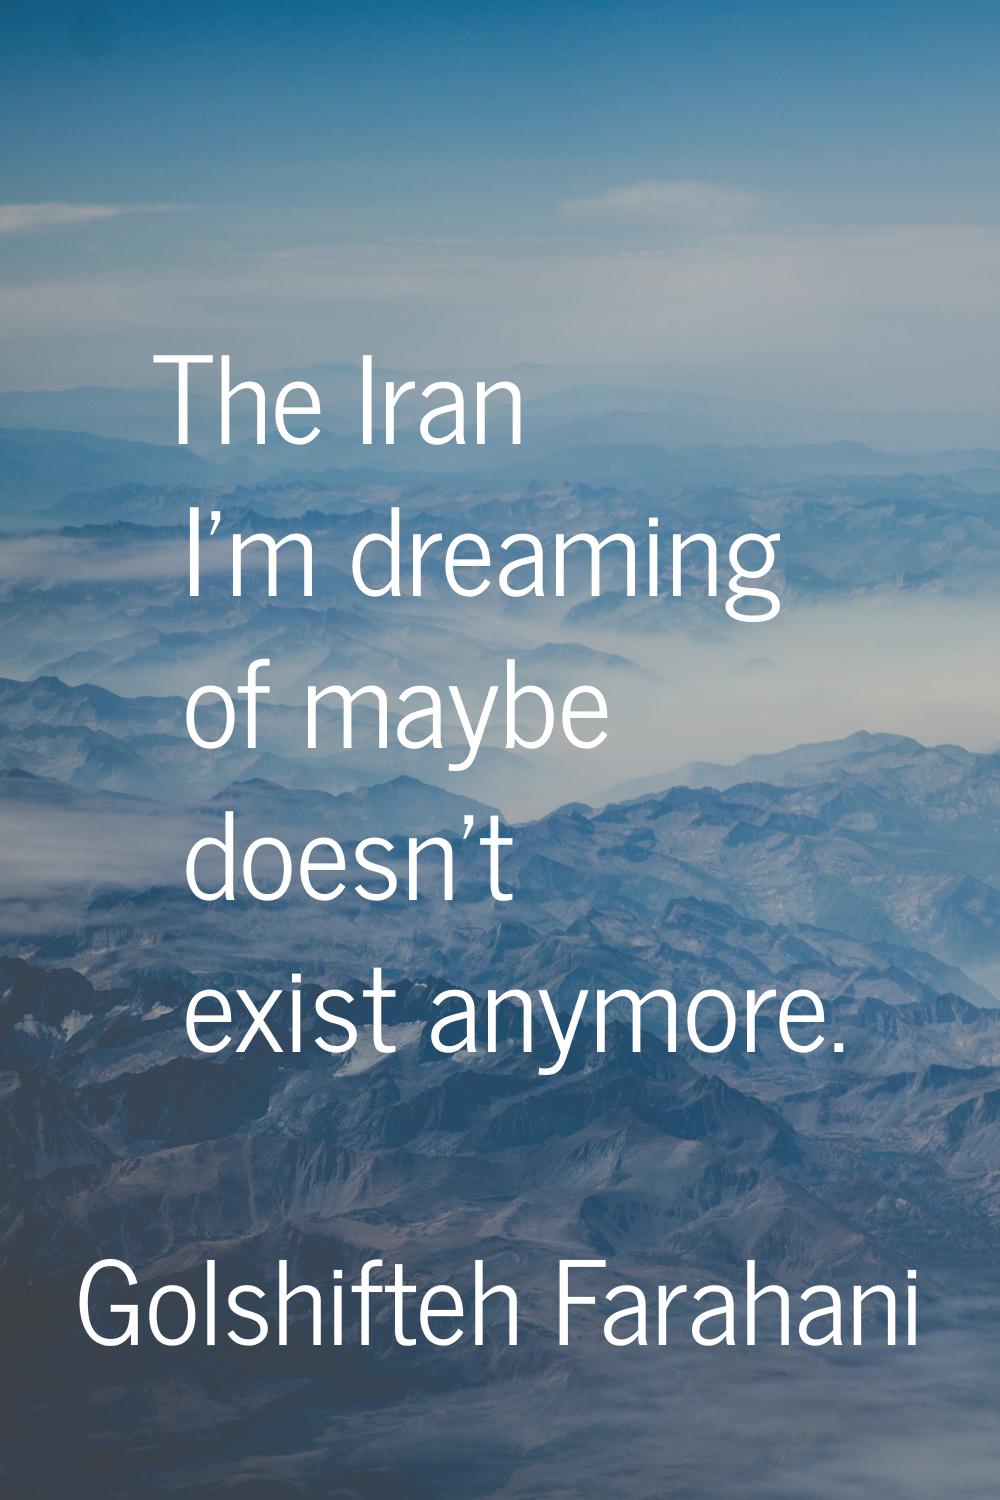 The Iran I'm dreaming of maybe doesn't exist anymore.